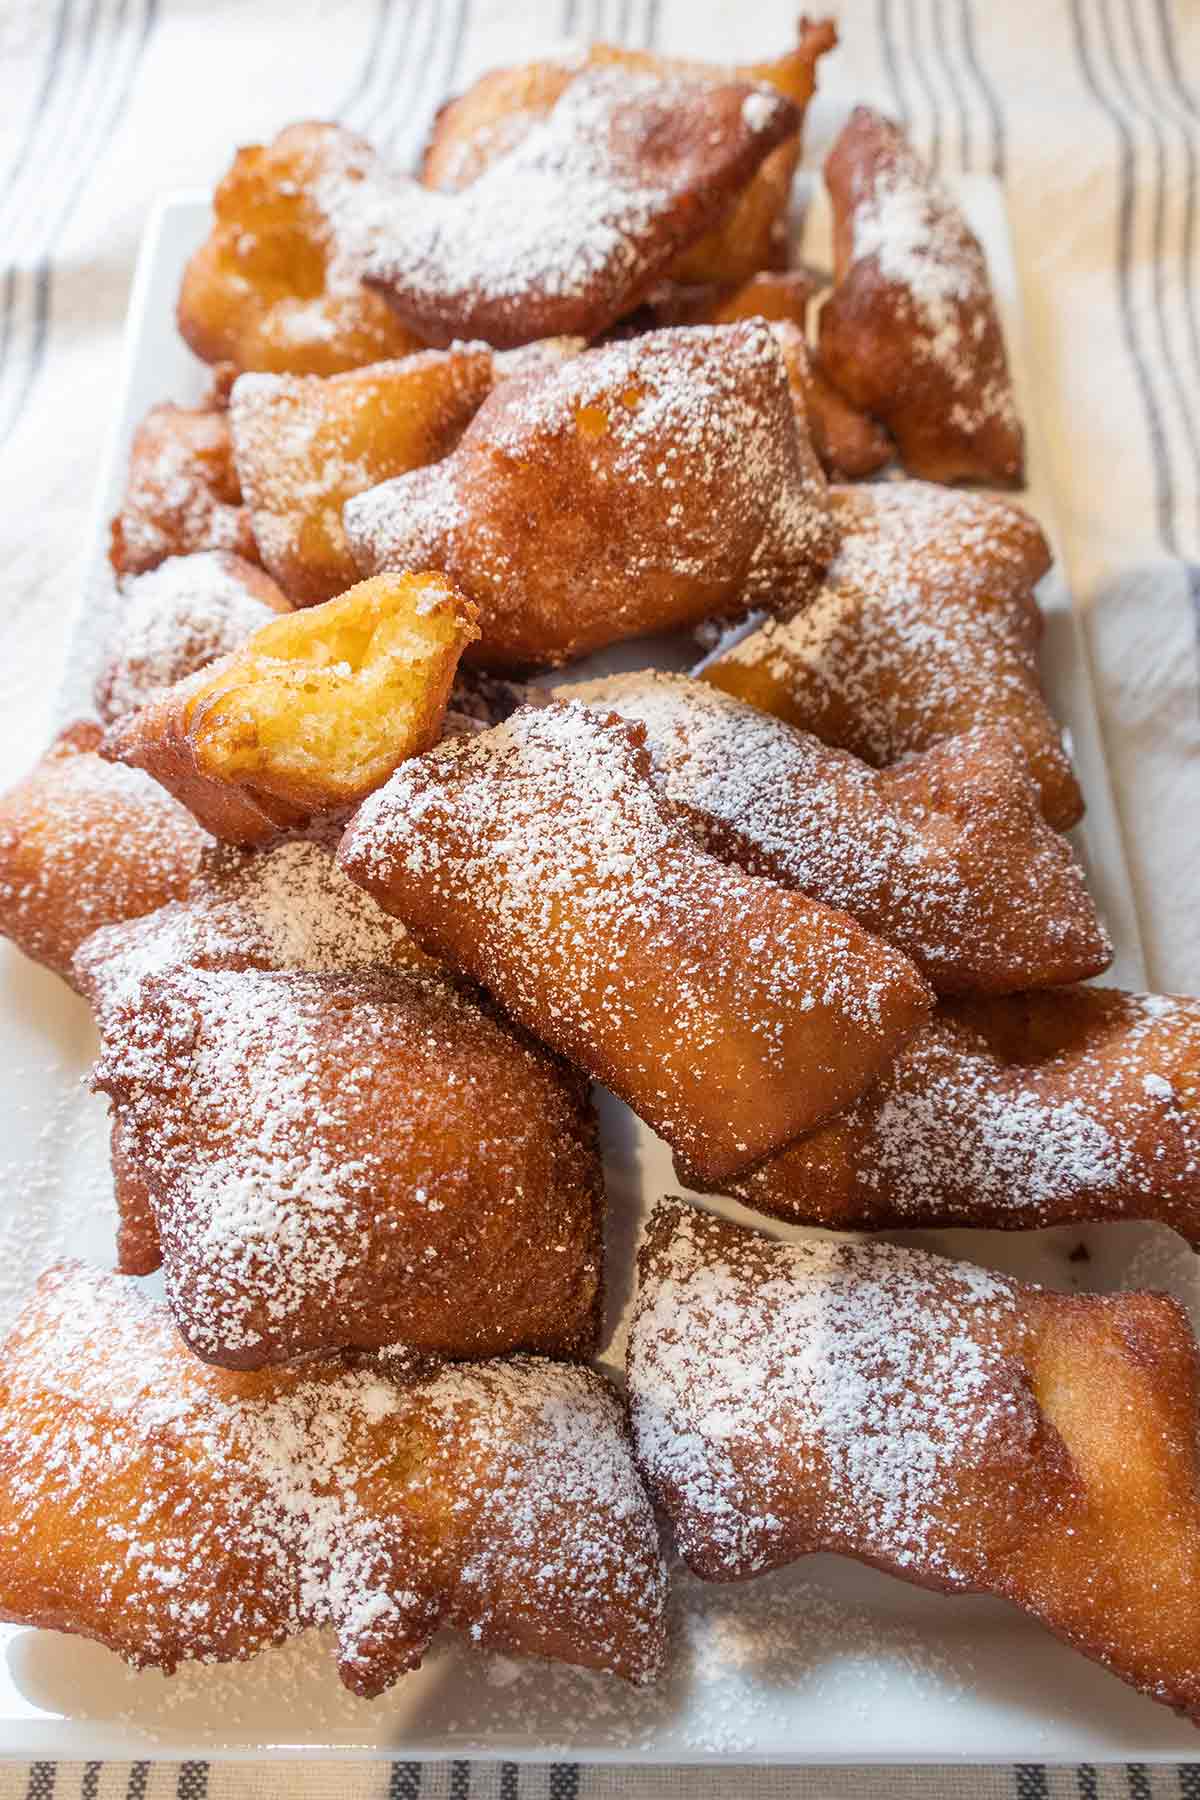 beignets dusted with powdered sugar on a platter